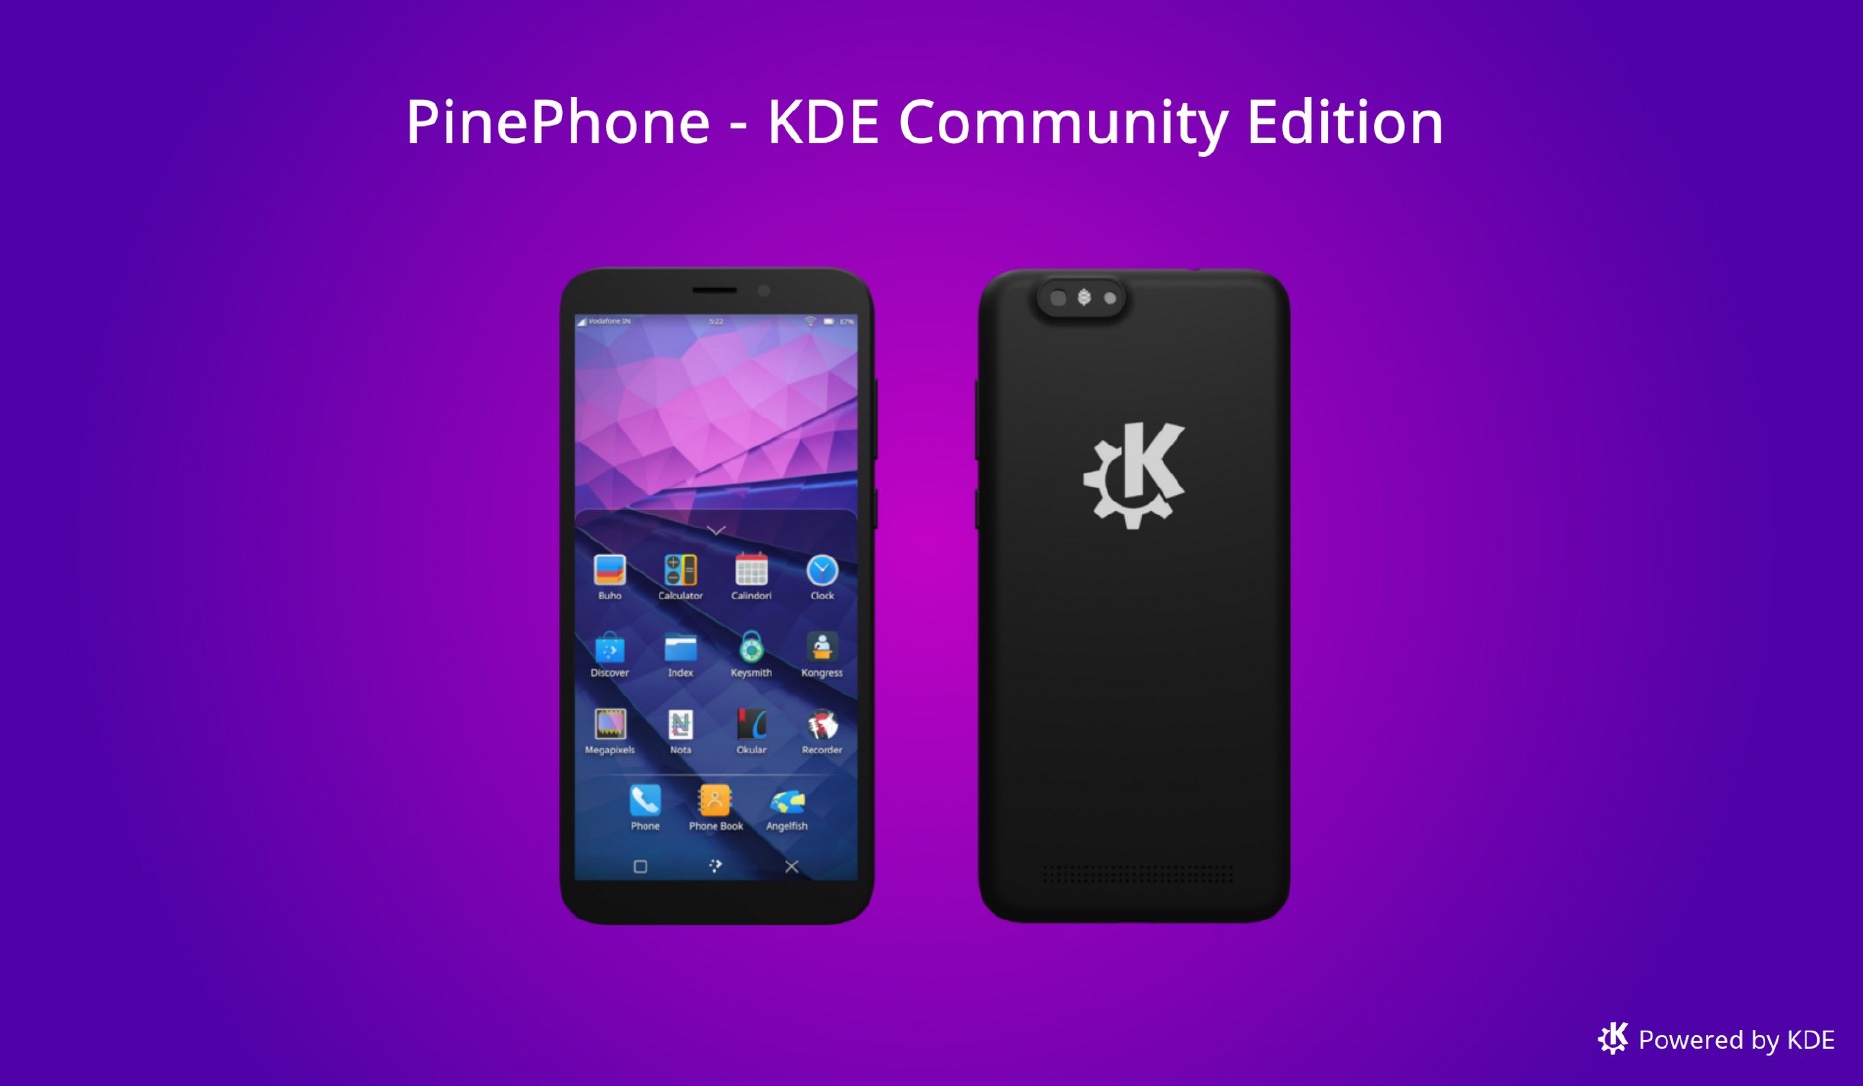 PinePhone KDE Community Edition Is Now Available for Pre-Order from $149.99